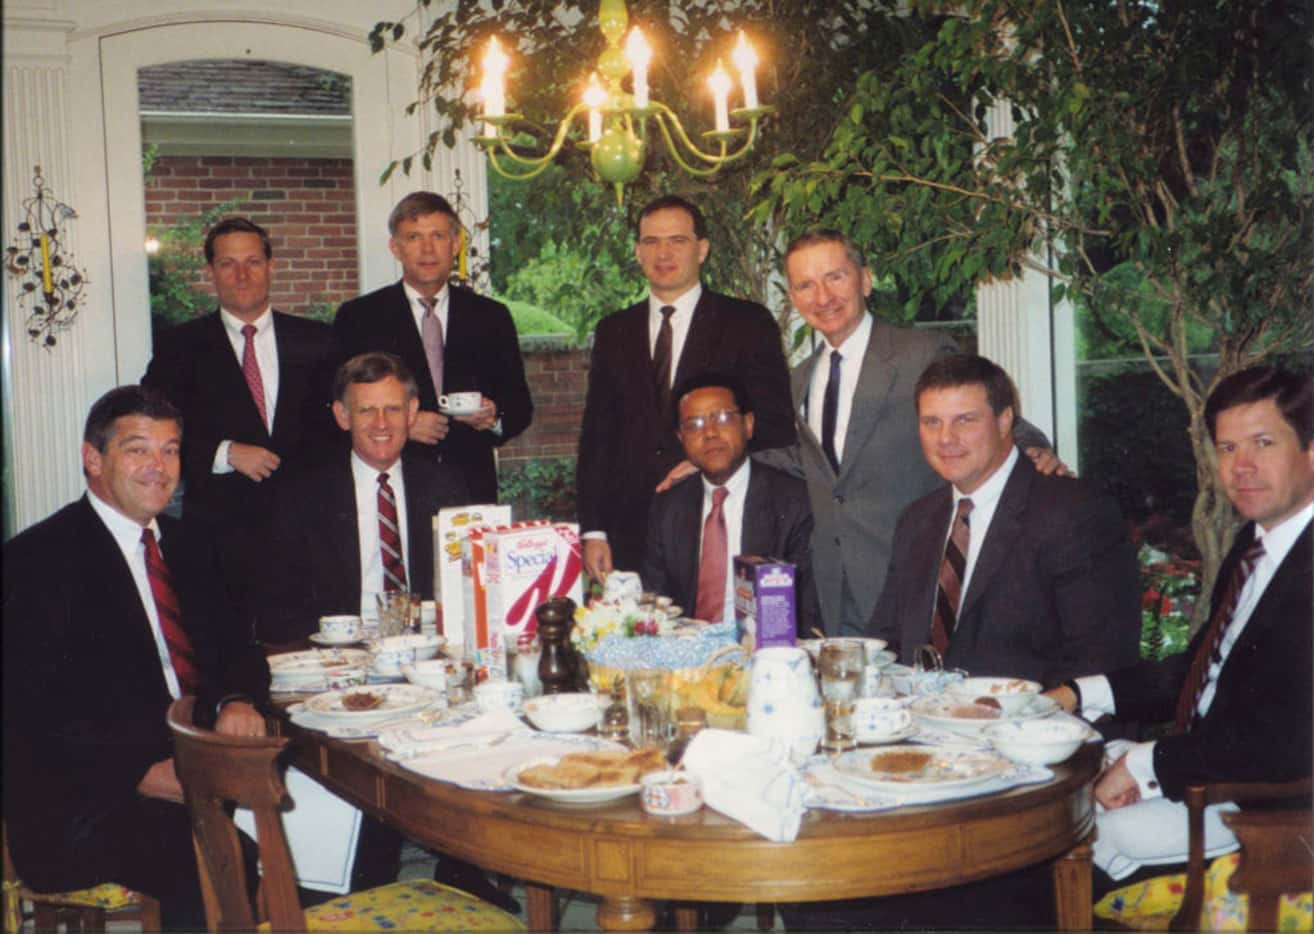 In 1988, former EDS executives gathered in the breakfast room of Margot and Ross Perot to...